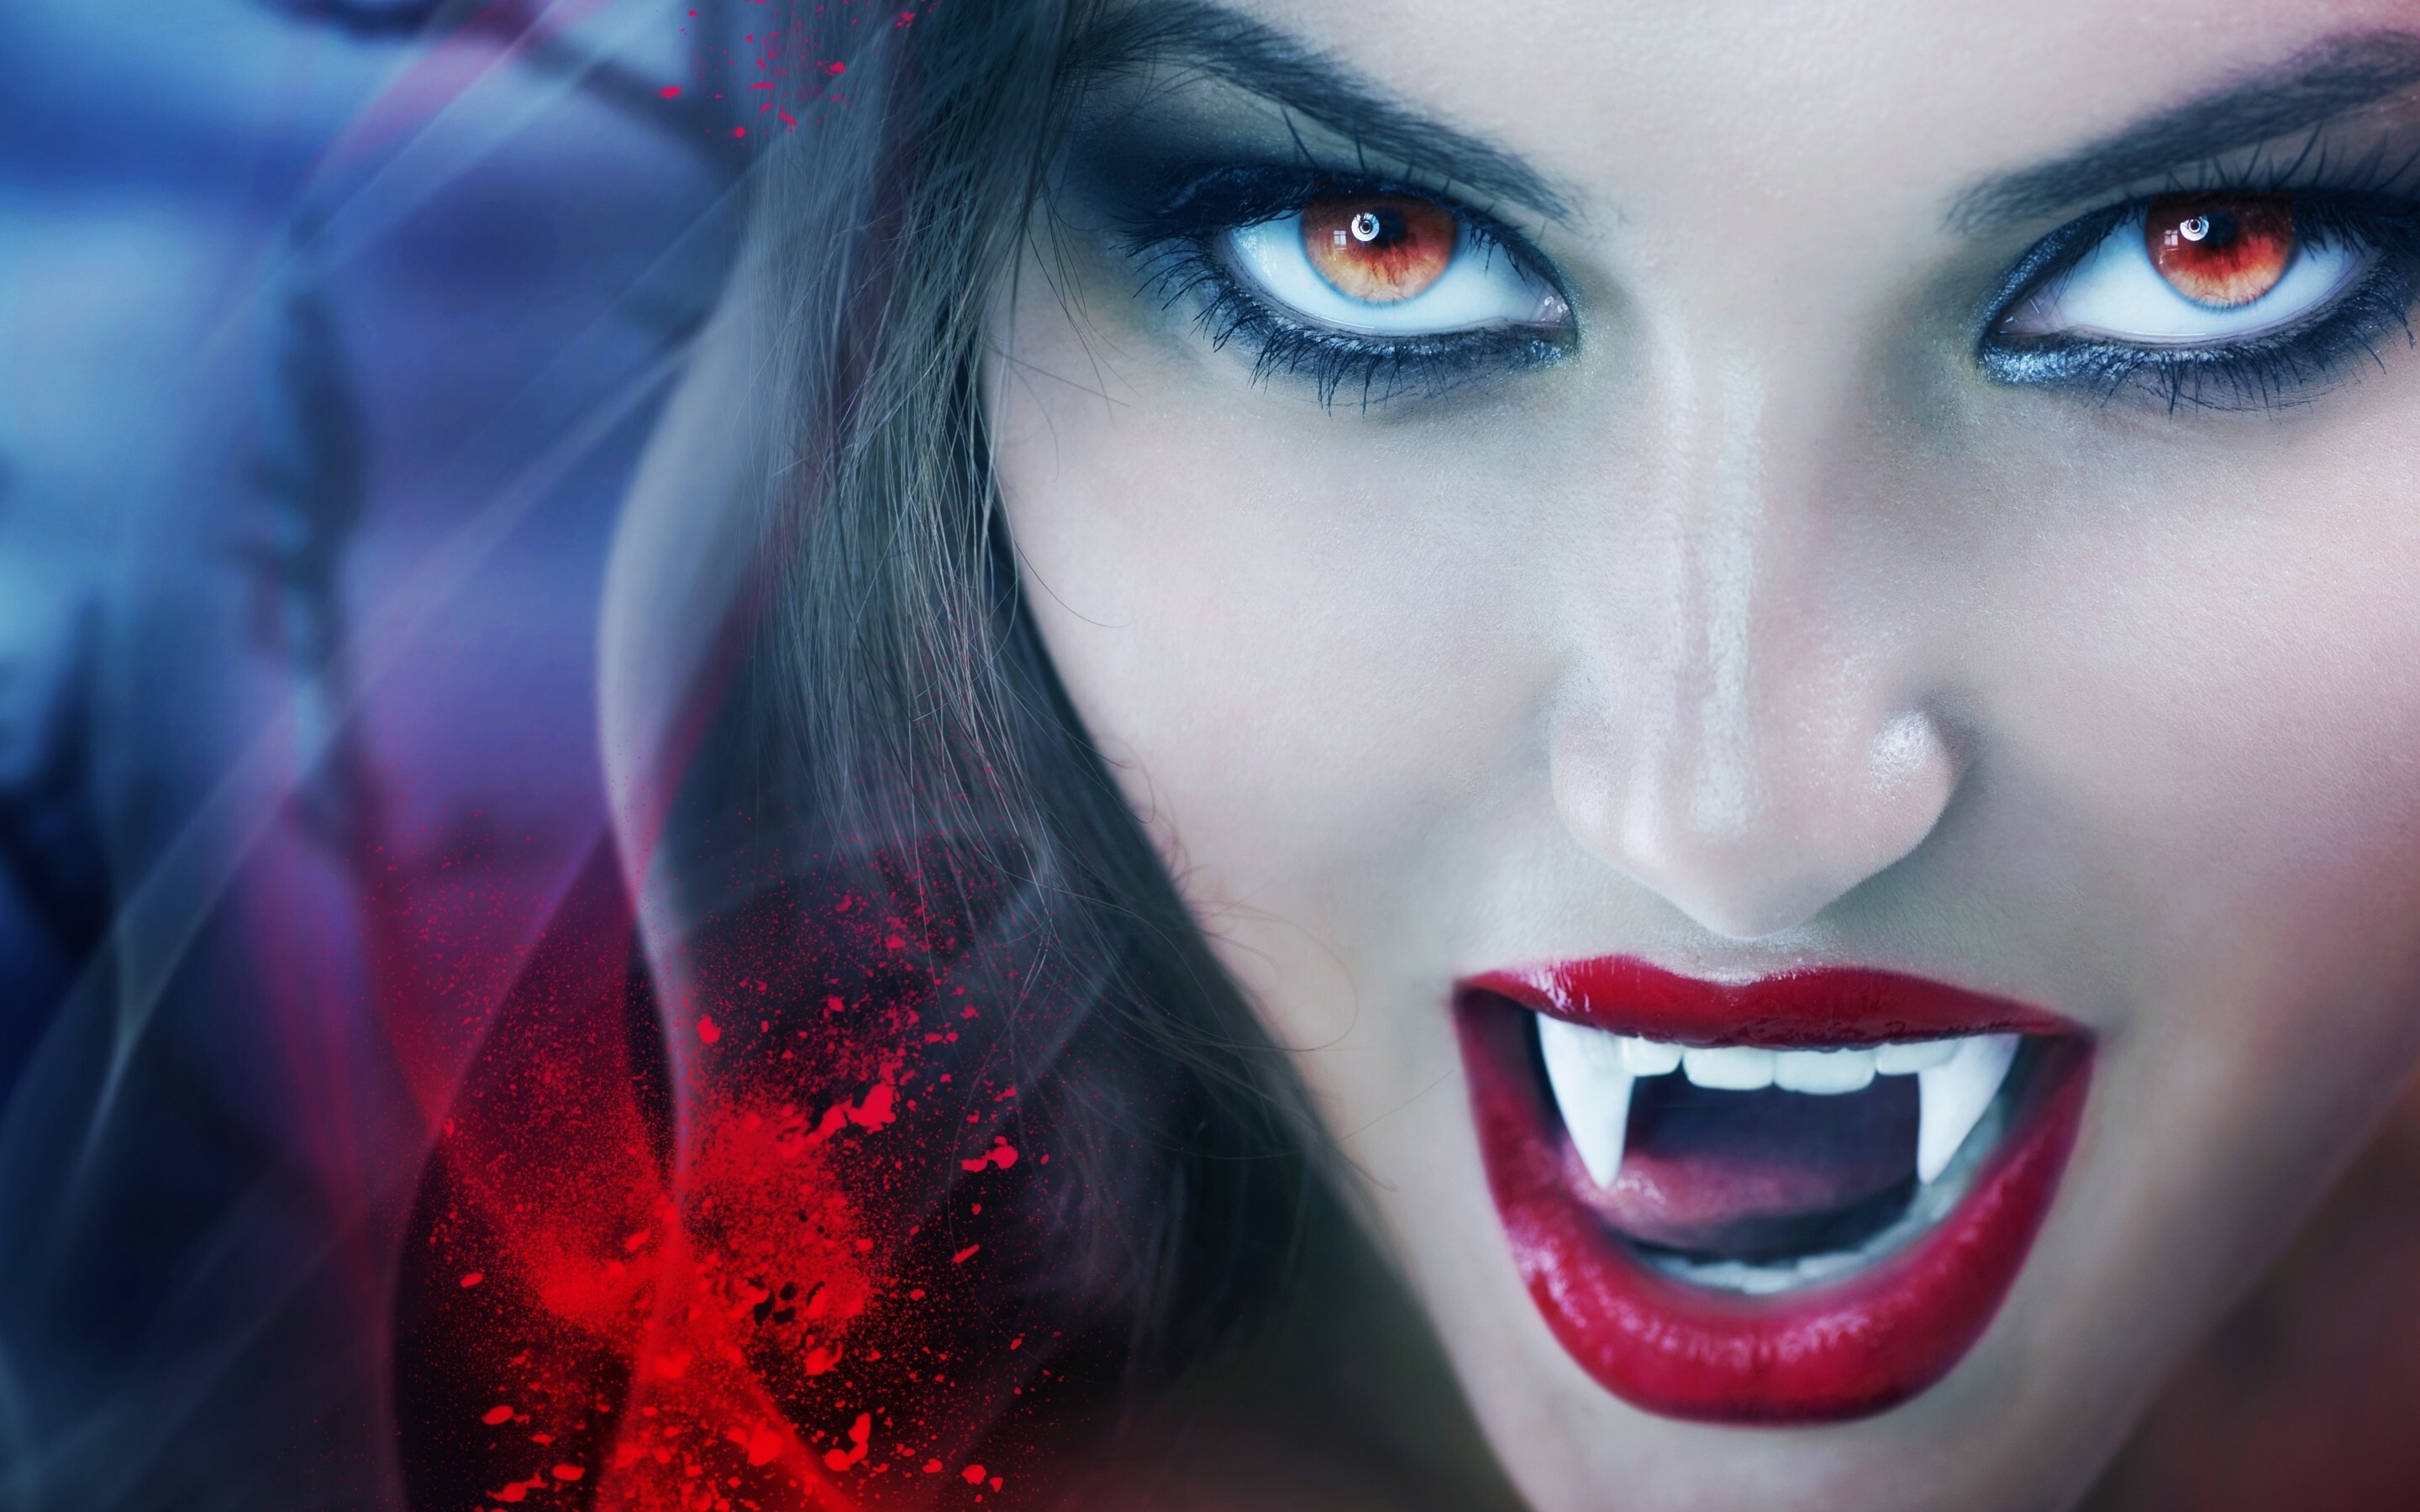 Vampire: Undead creatures that often visited loved ones, European folklore. 2880x1800 HD Wallpaper.